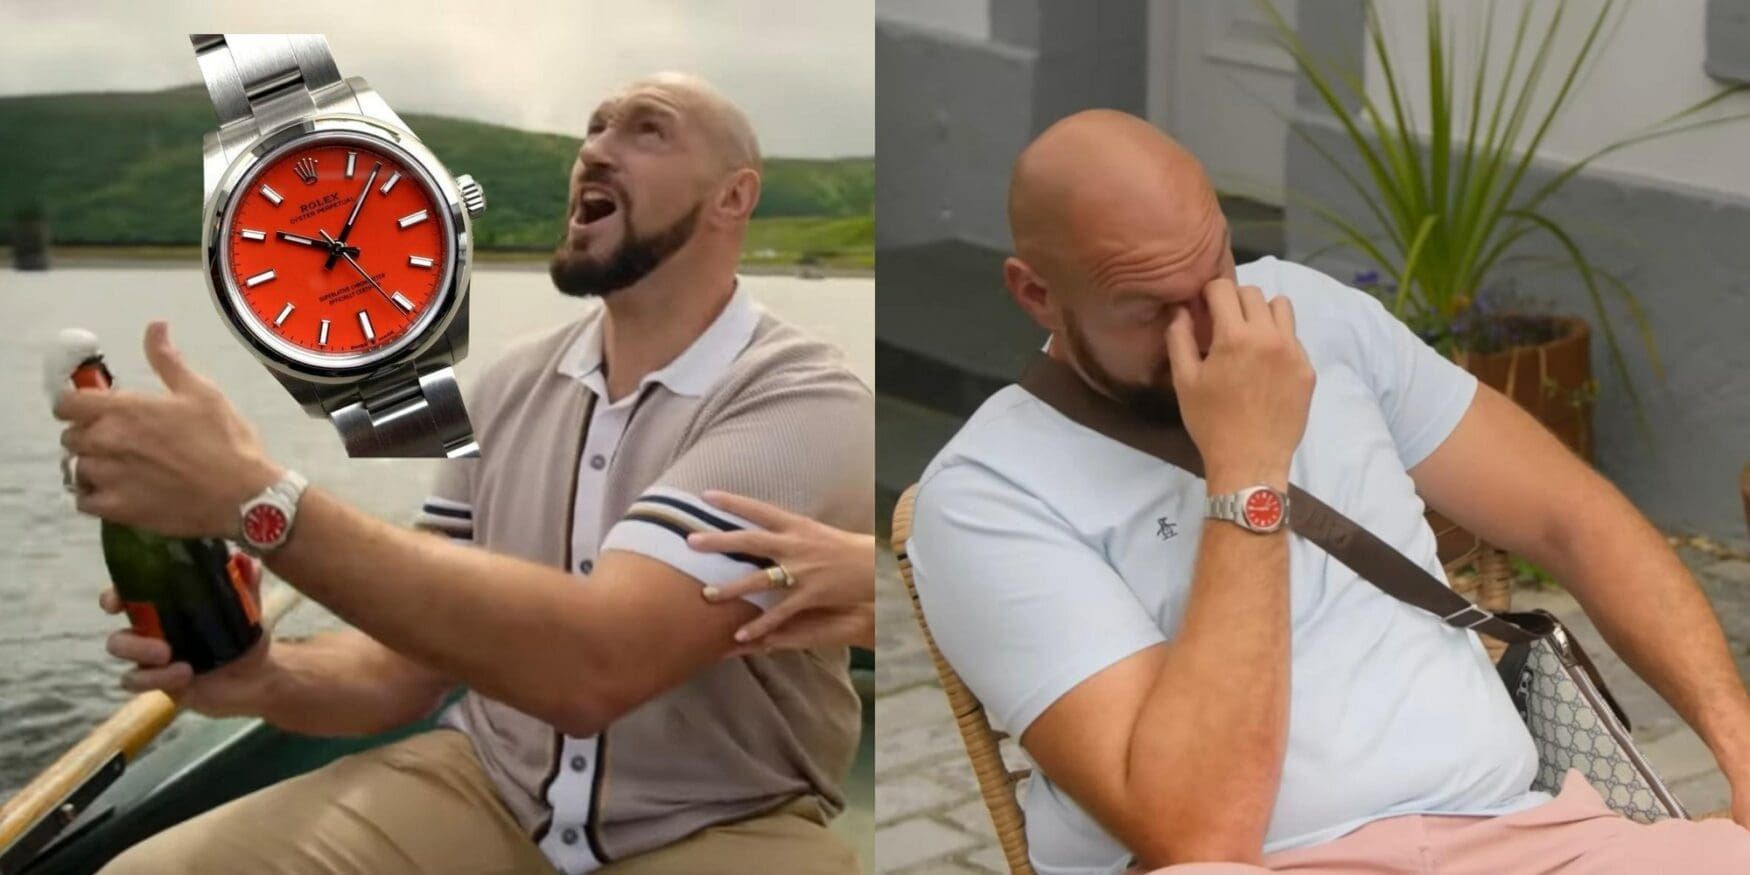 Tyson Fury’s new reality TV series looks set to be a watchspotter’s delight